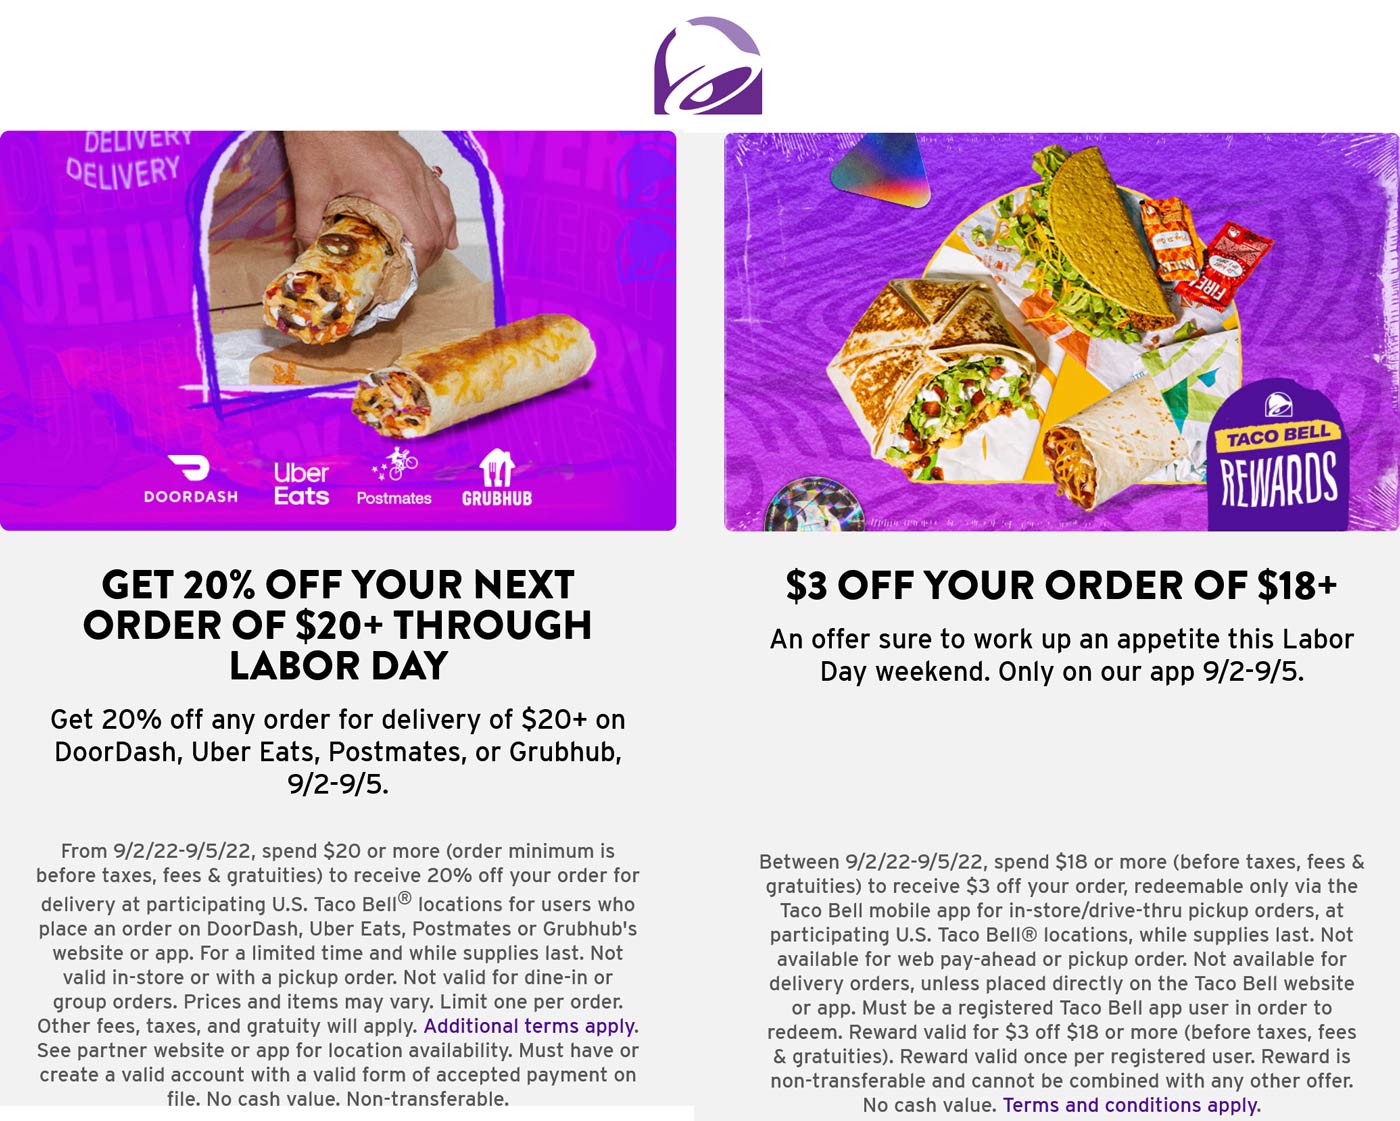 Taco Bell restaurants Coupon  20% off $20+ delivery order at Taco Bell #tacobell 